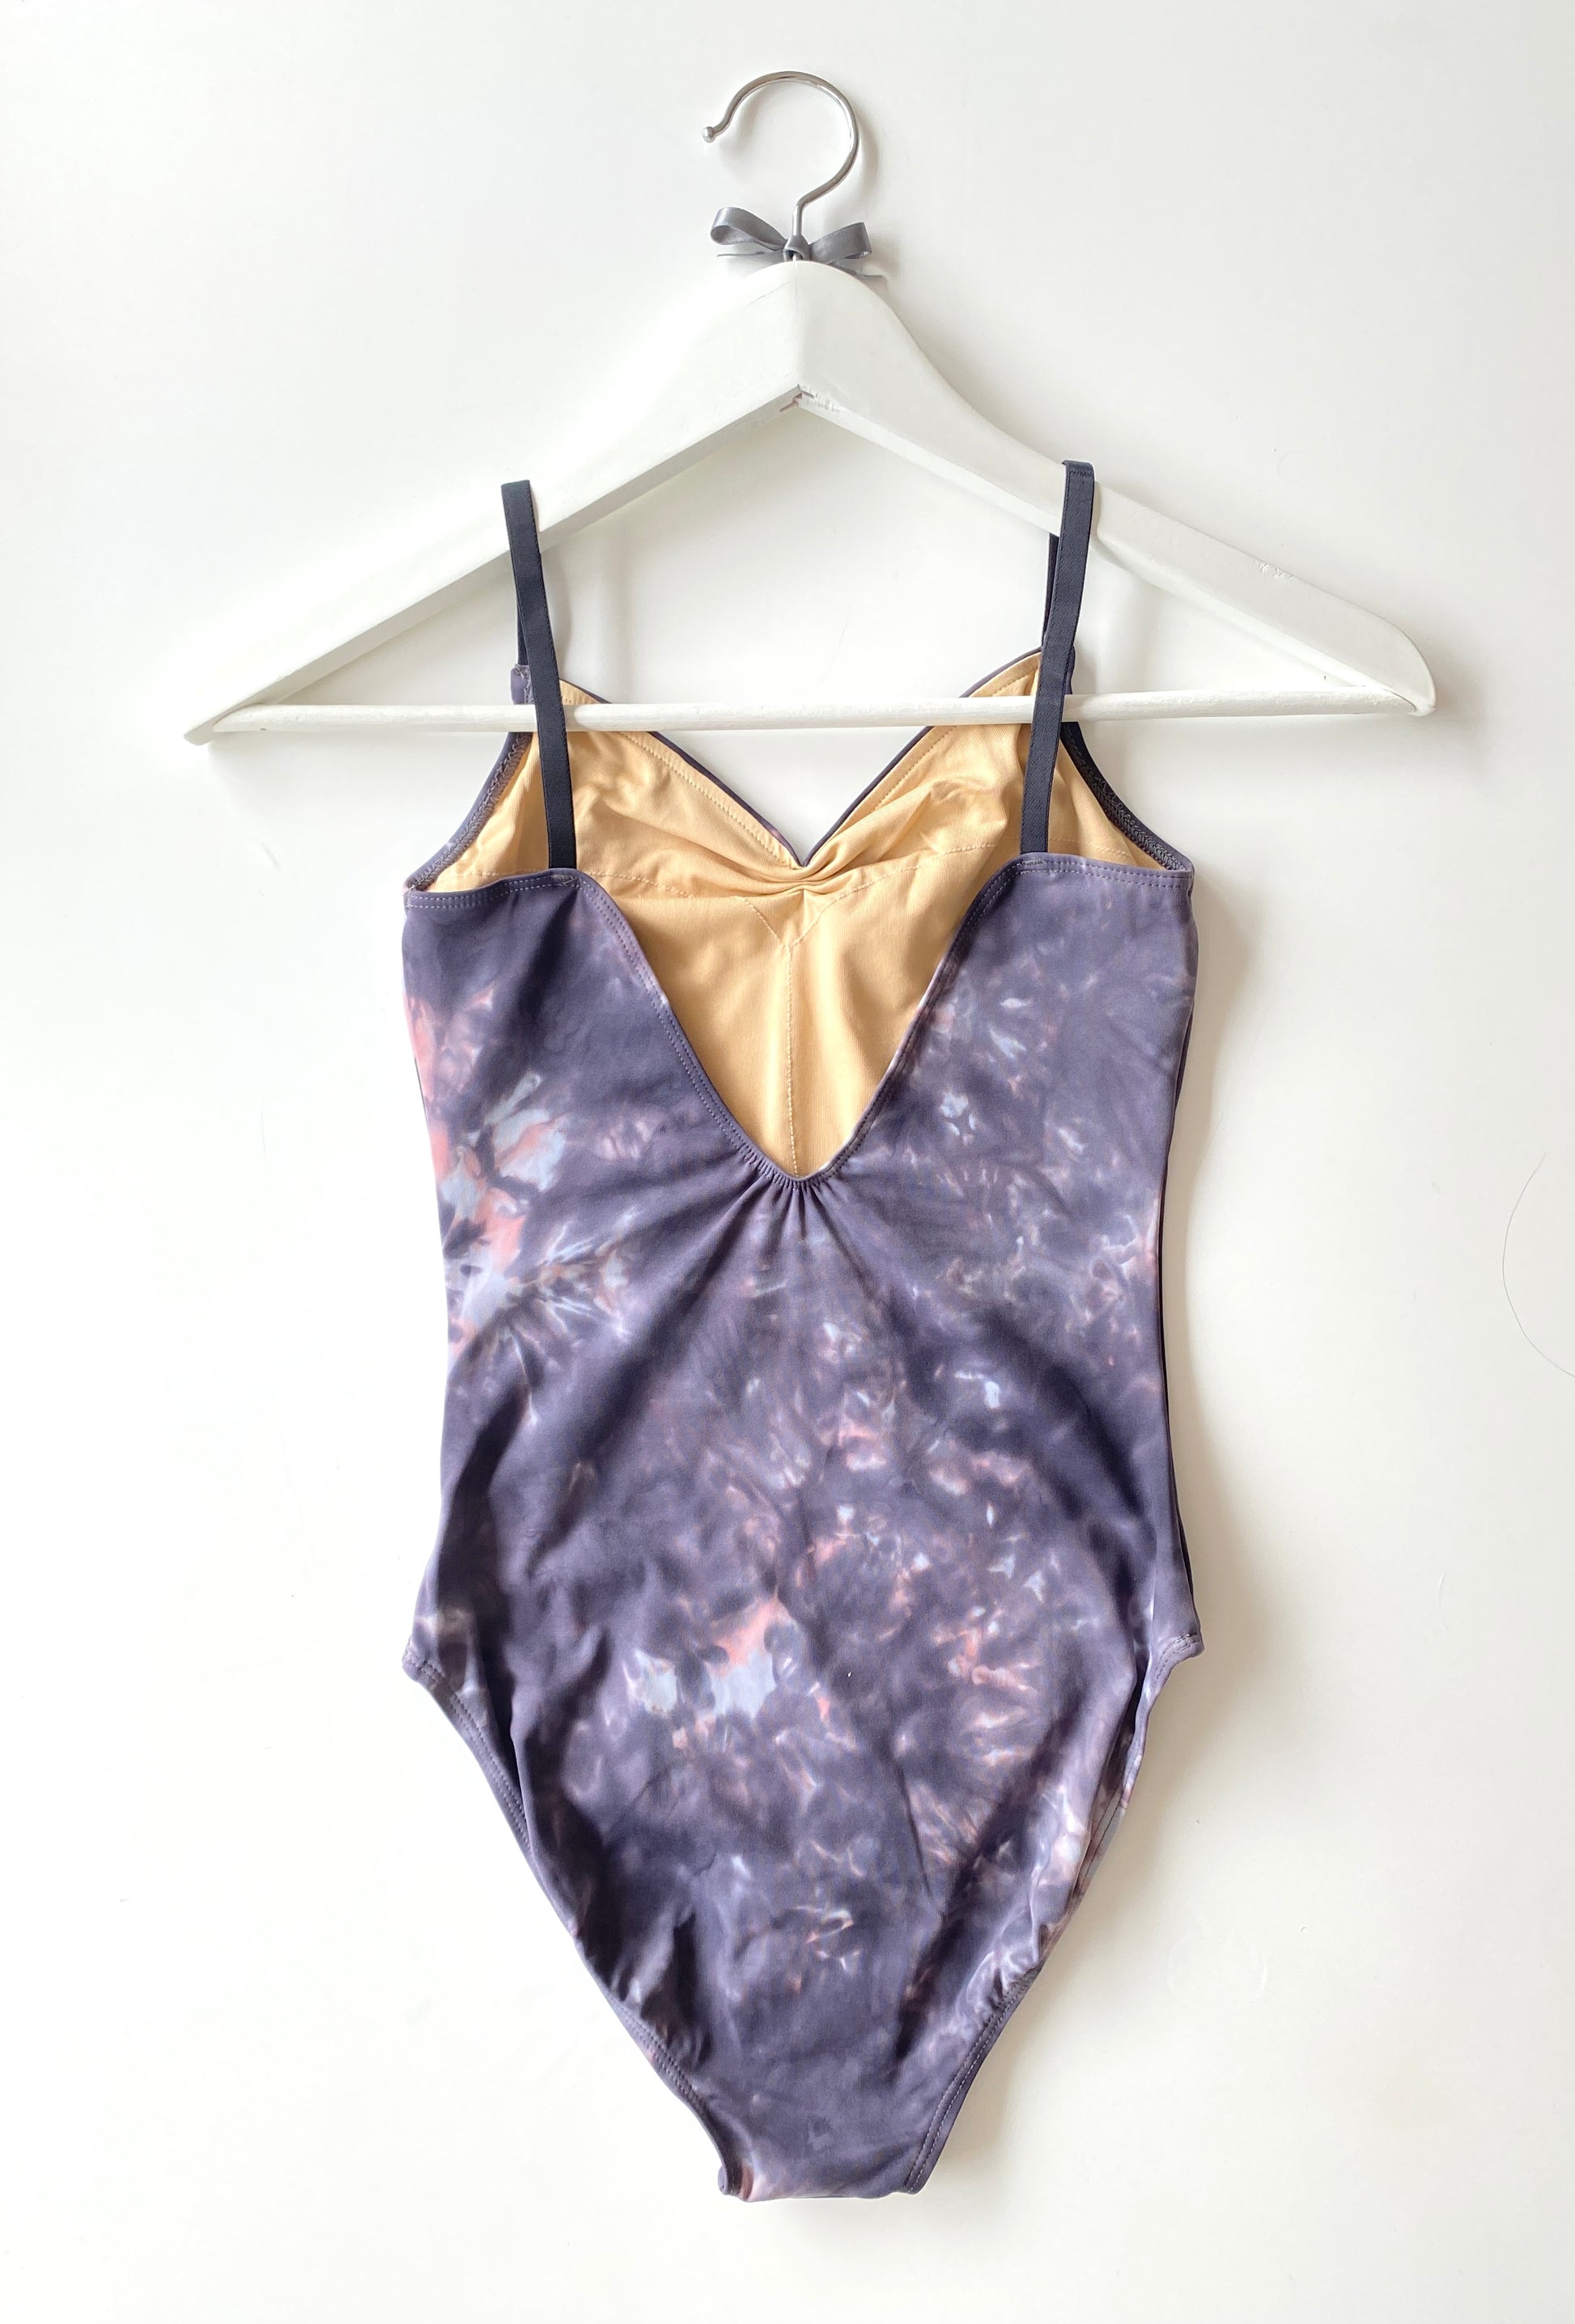 Super cute Tie Dye camisole leotard in pink, purple and grey from Baiwu sold at the Collective Dancewear